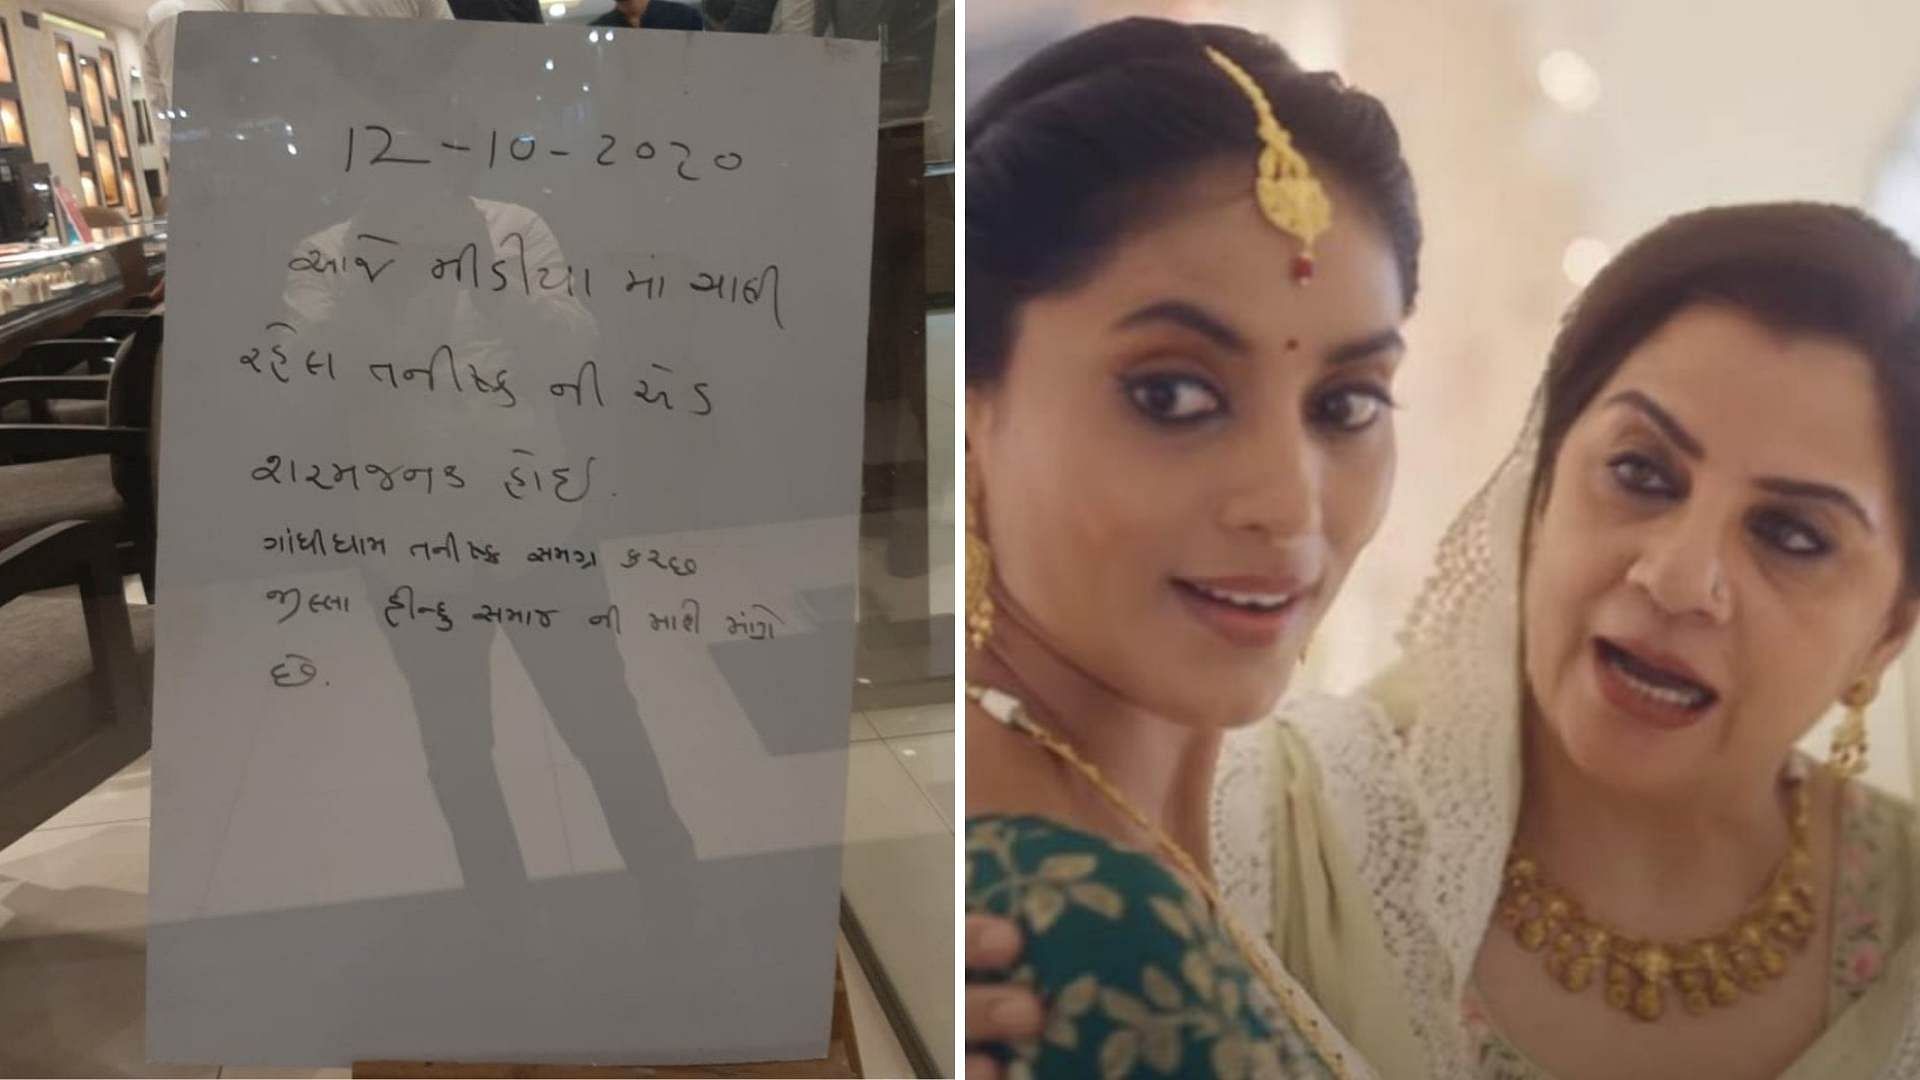 The note, put up at the entrance of the Tanishq store in Gandhidham (left), and a still from the now retracted Tanishq ad (Right).